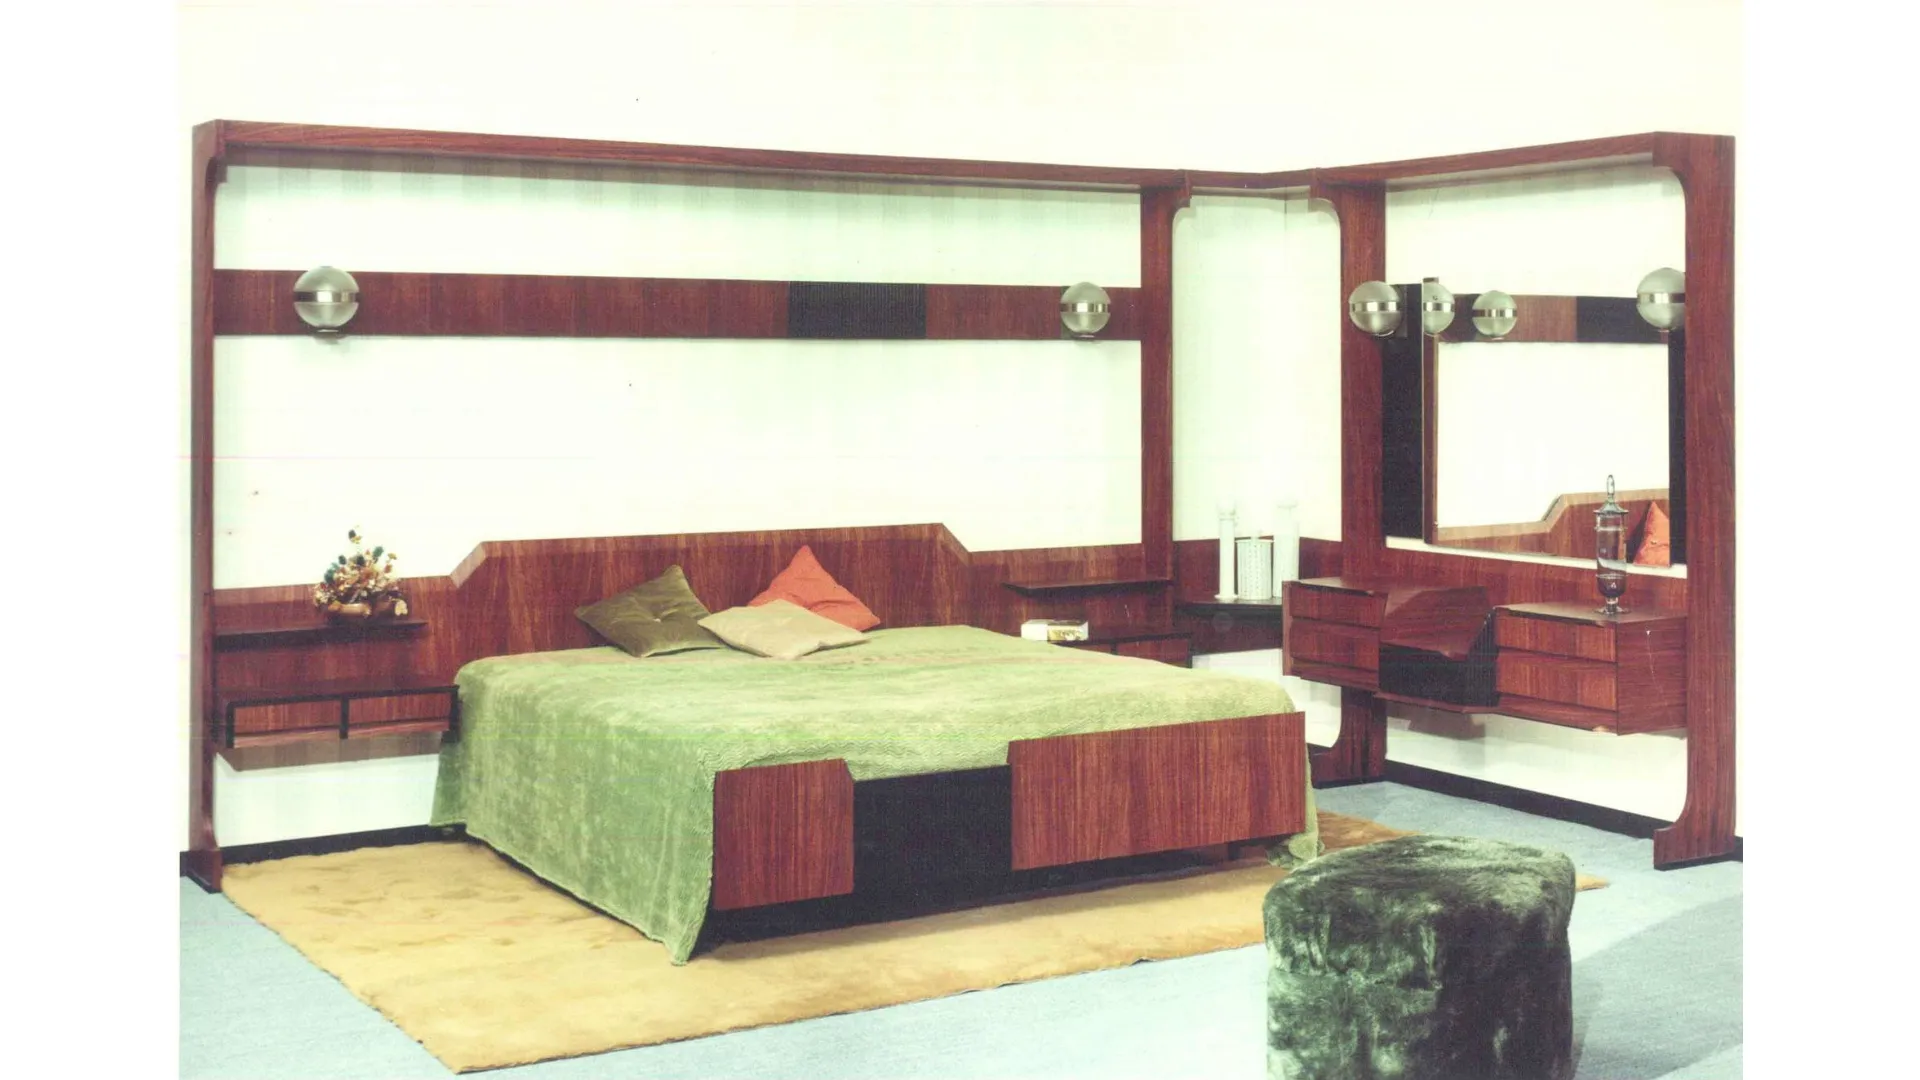 We have been designing your home since 1963